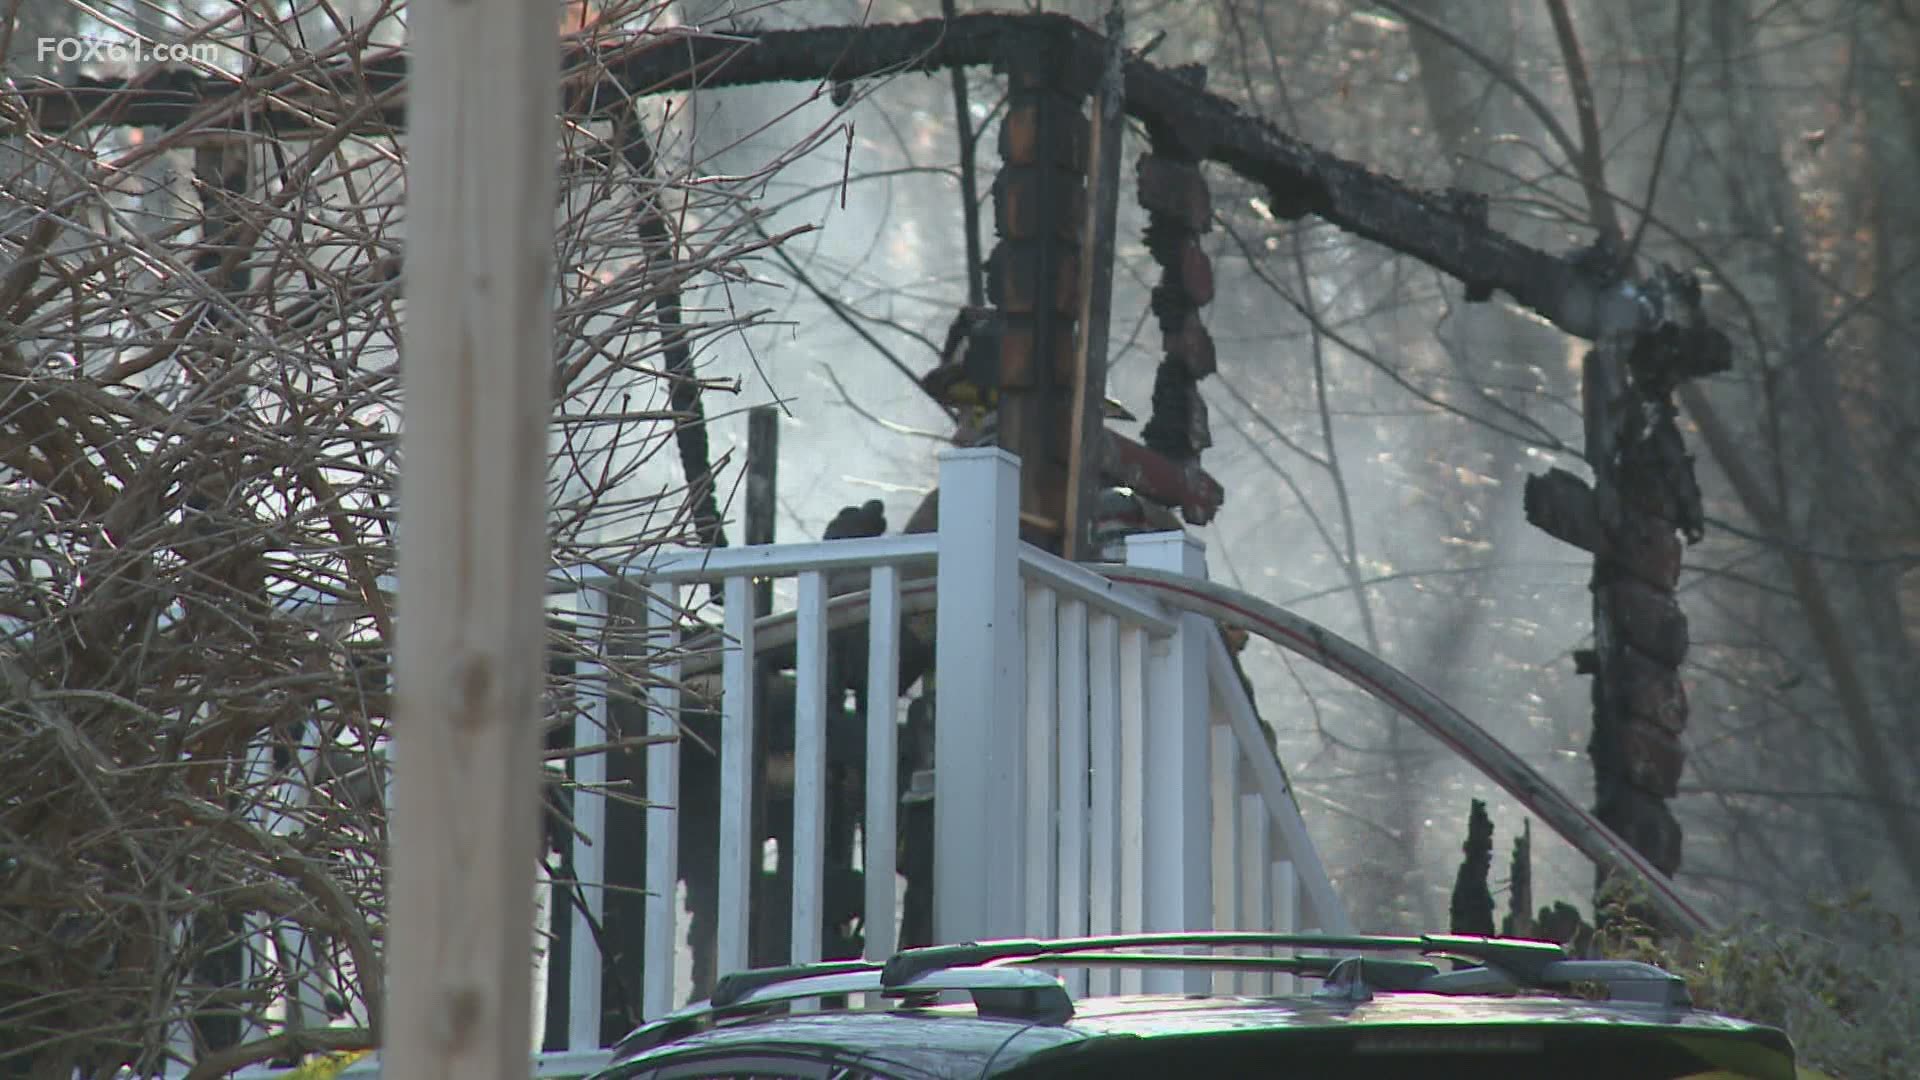 One person was injured in the fire at the home, where two people live. The cause is under investigation.